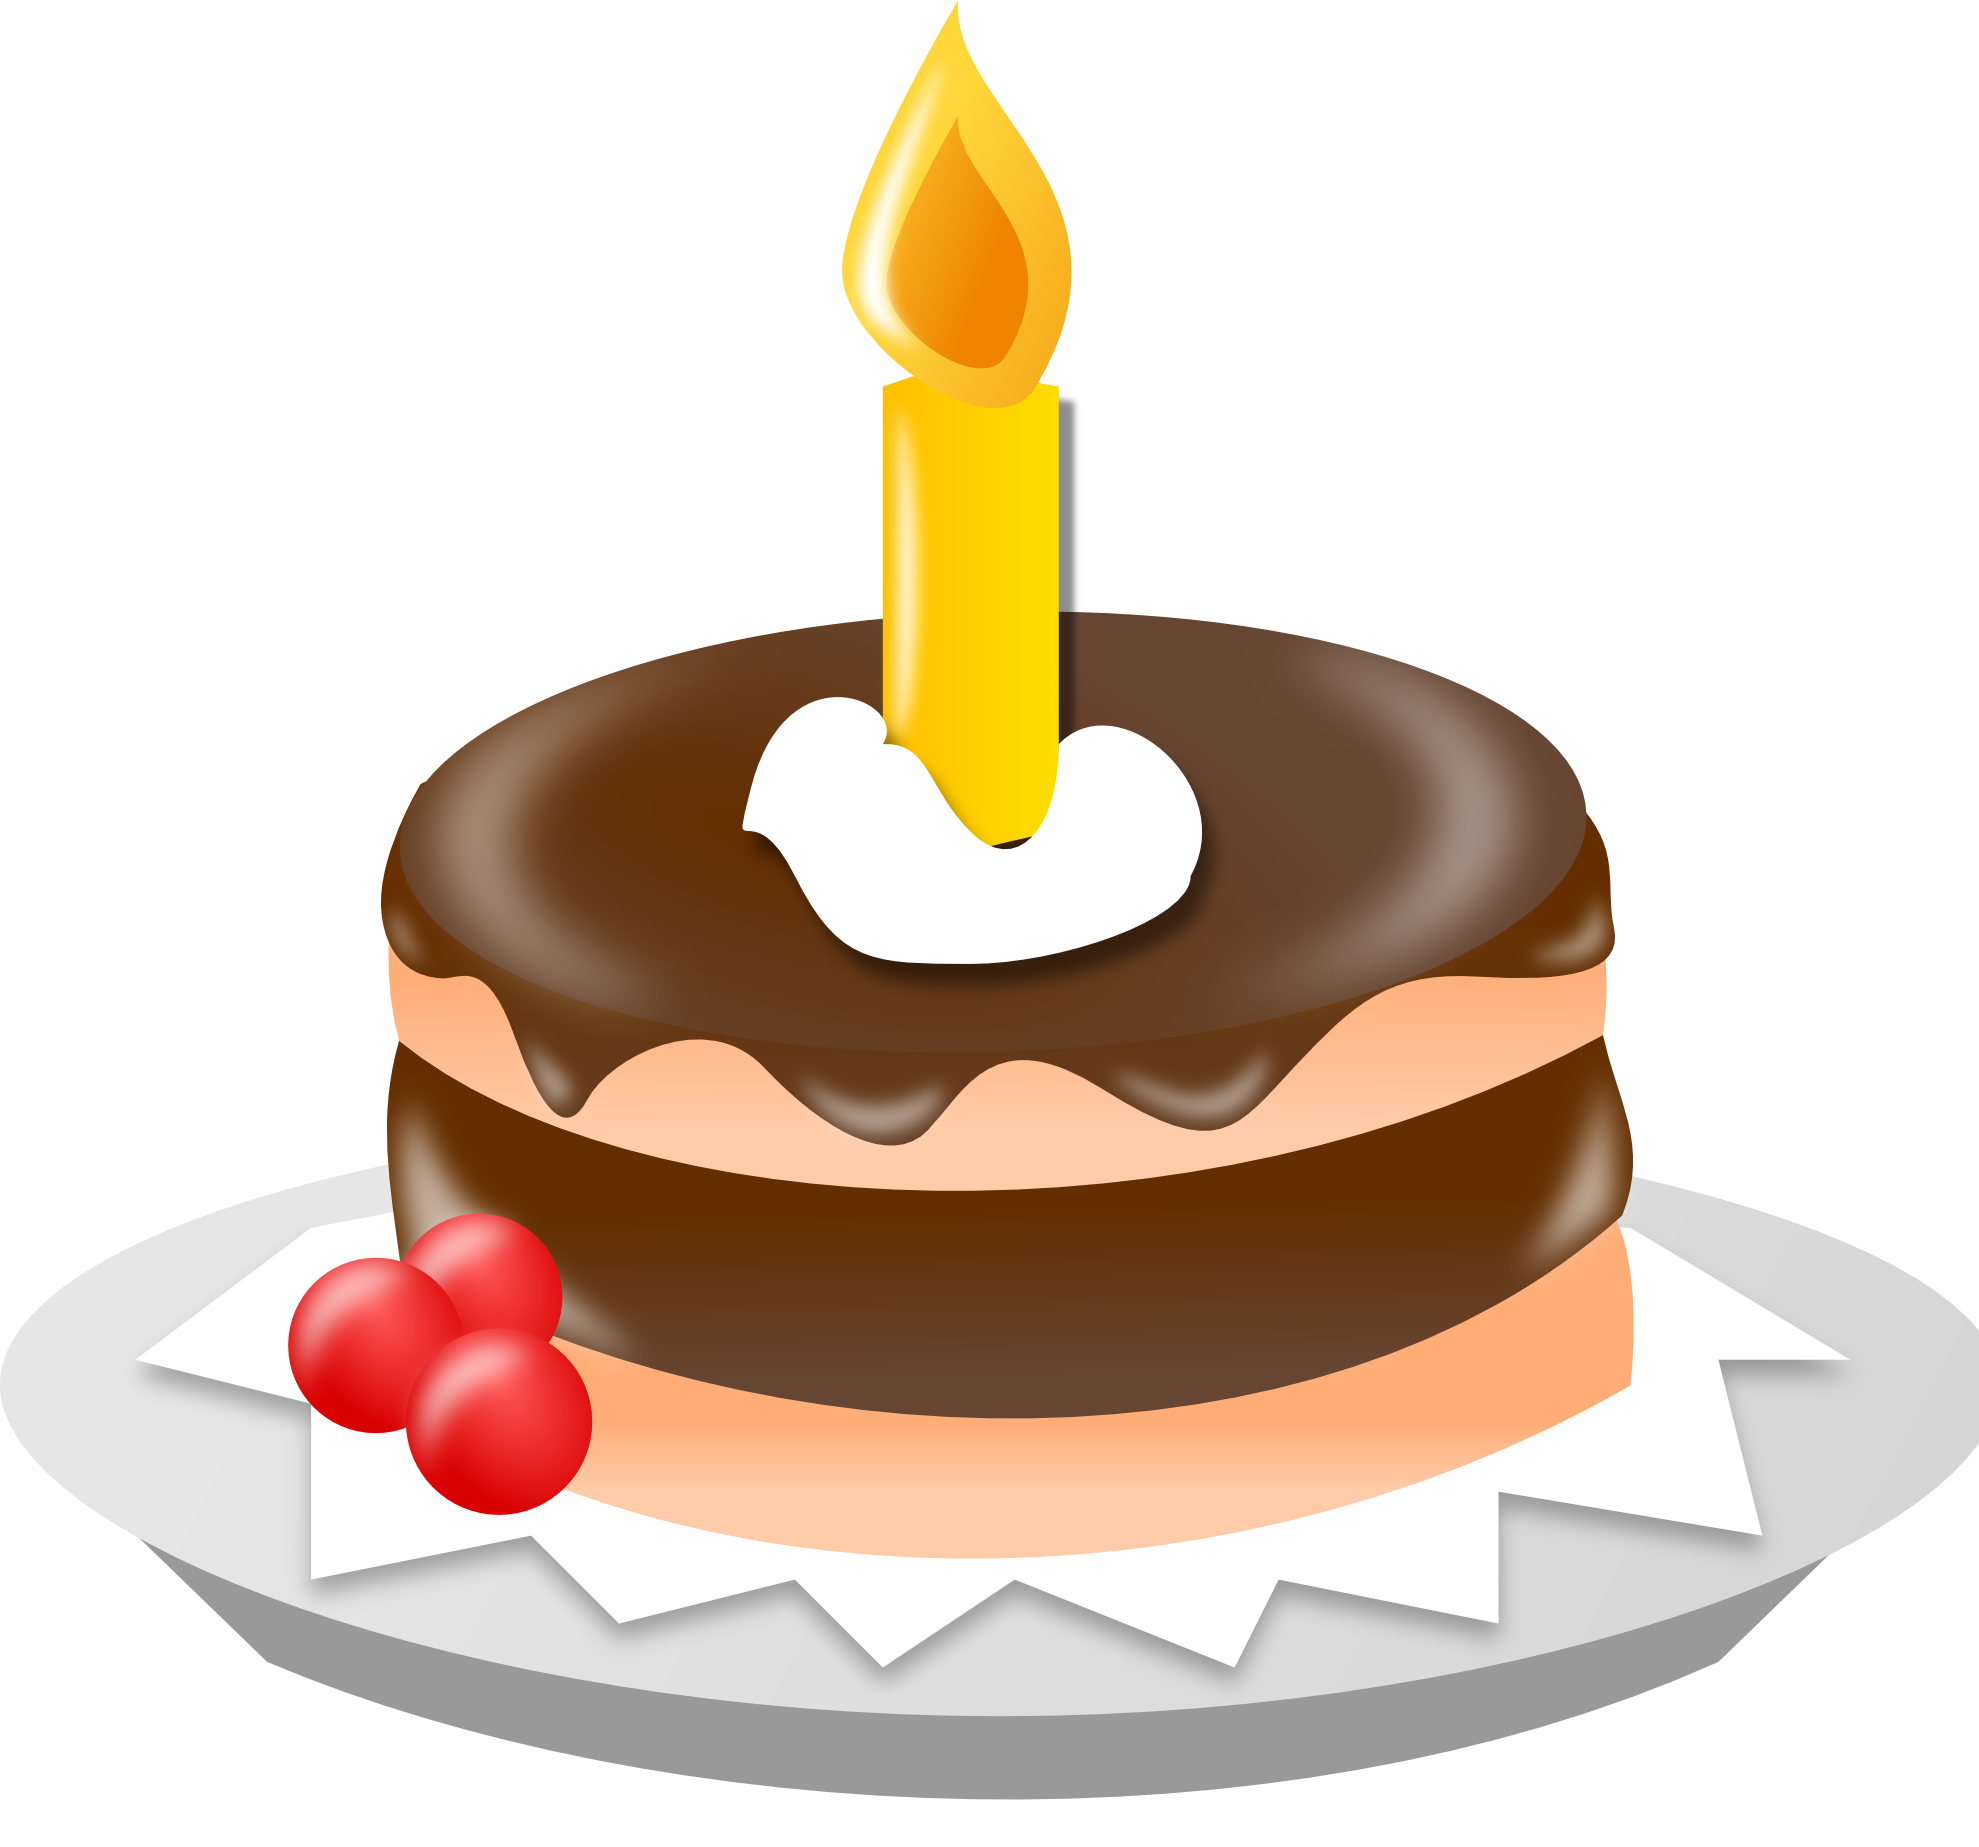 Download Birthday Cake Free PNG photo images and clipart | FreePNGImg